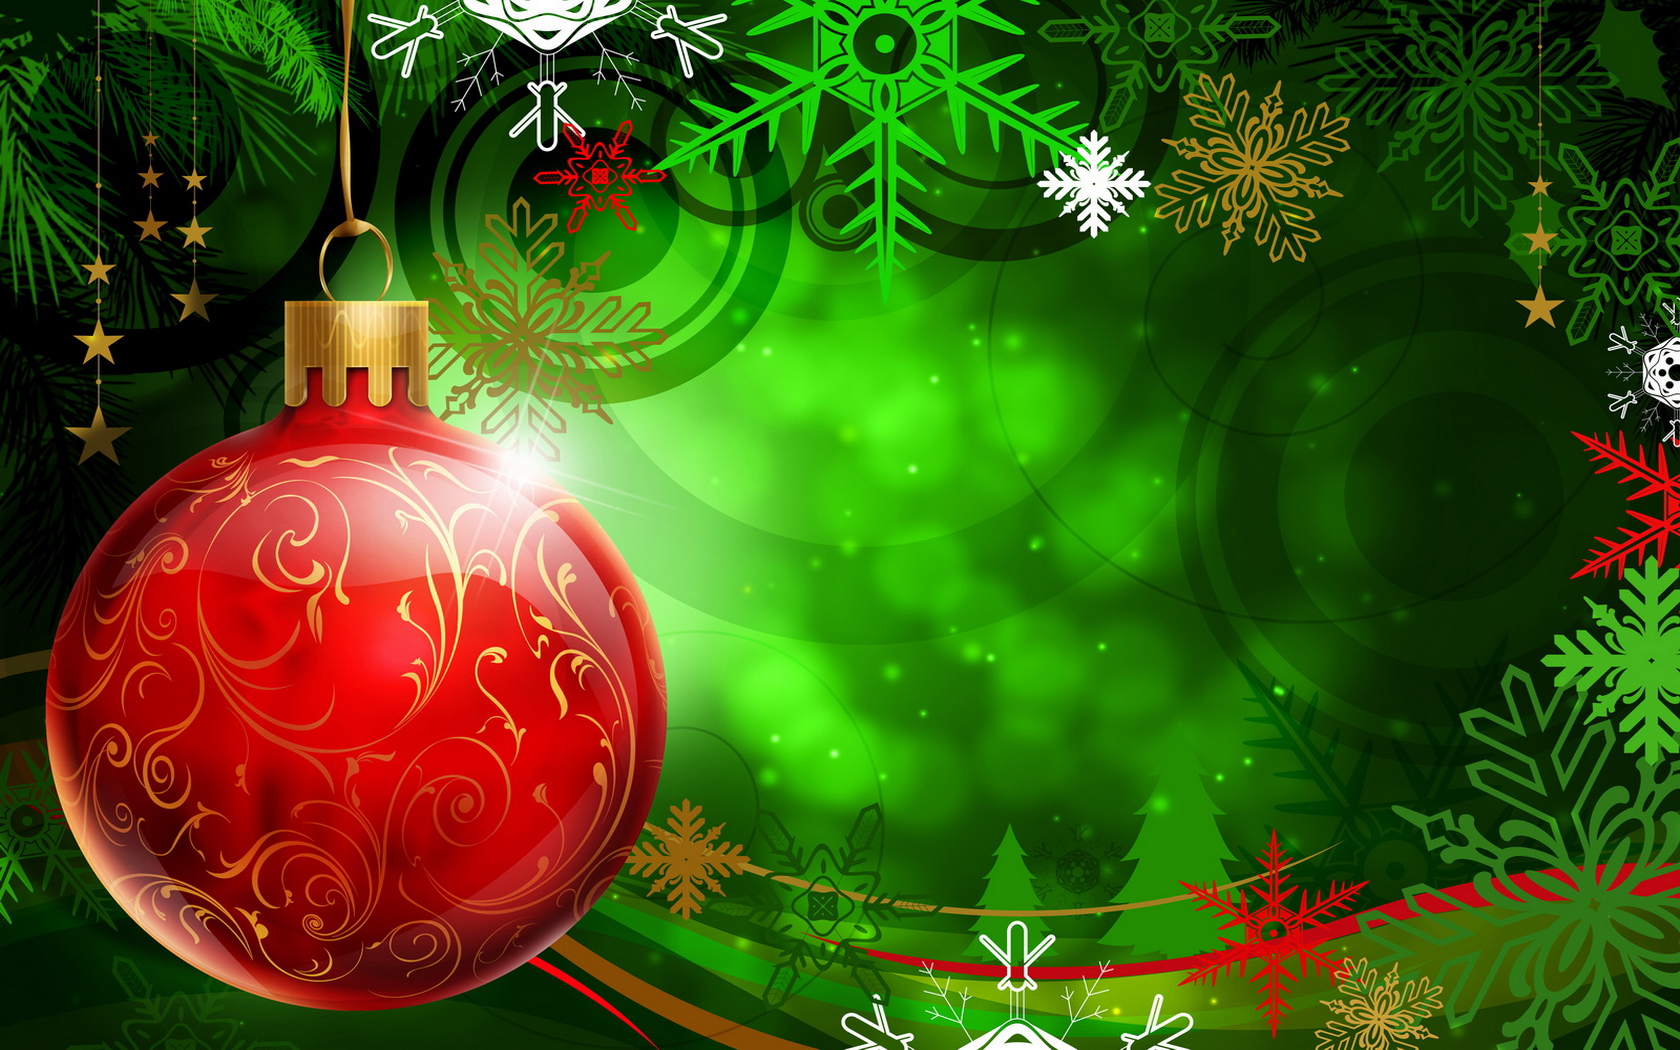  wallpaper android free live christmas wallpaper android Desktop